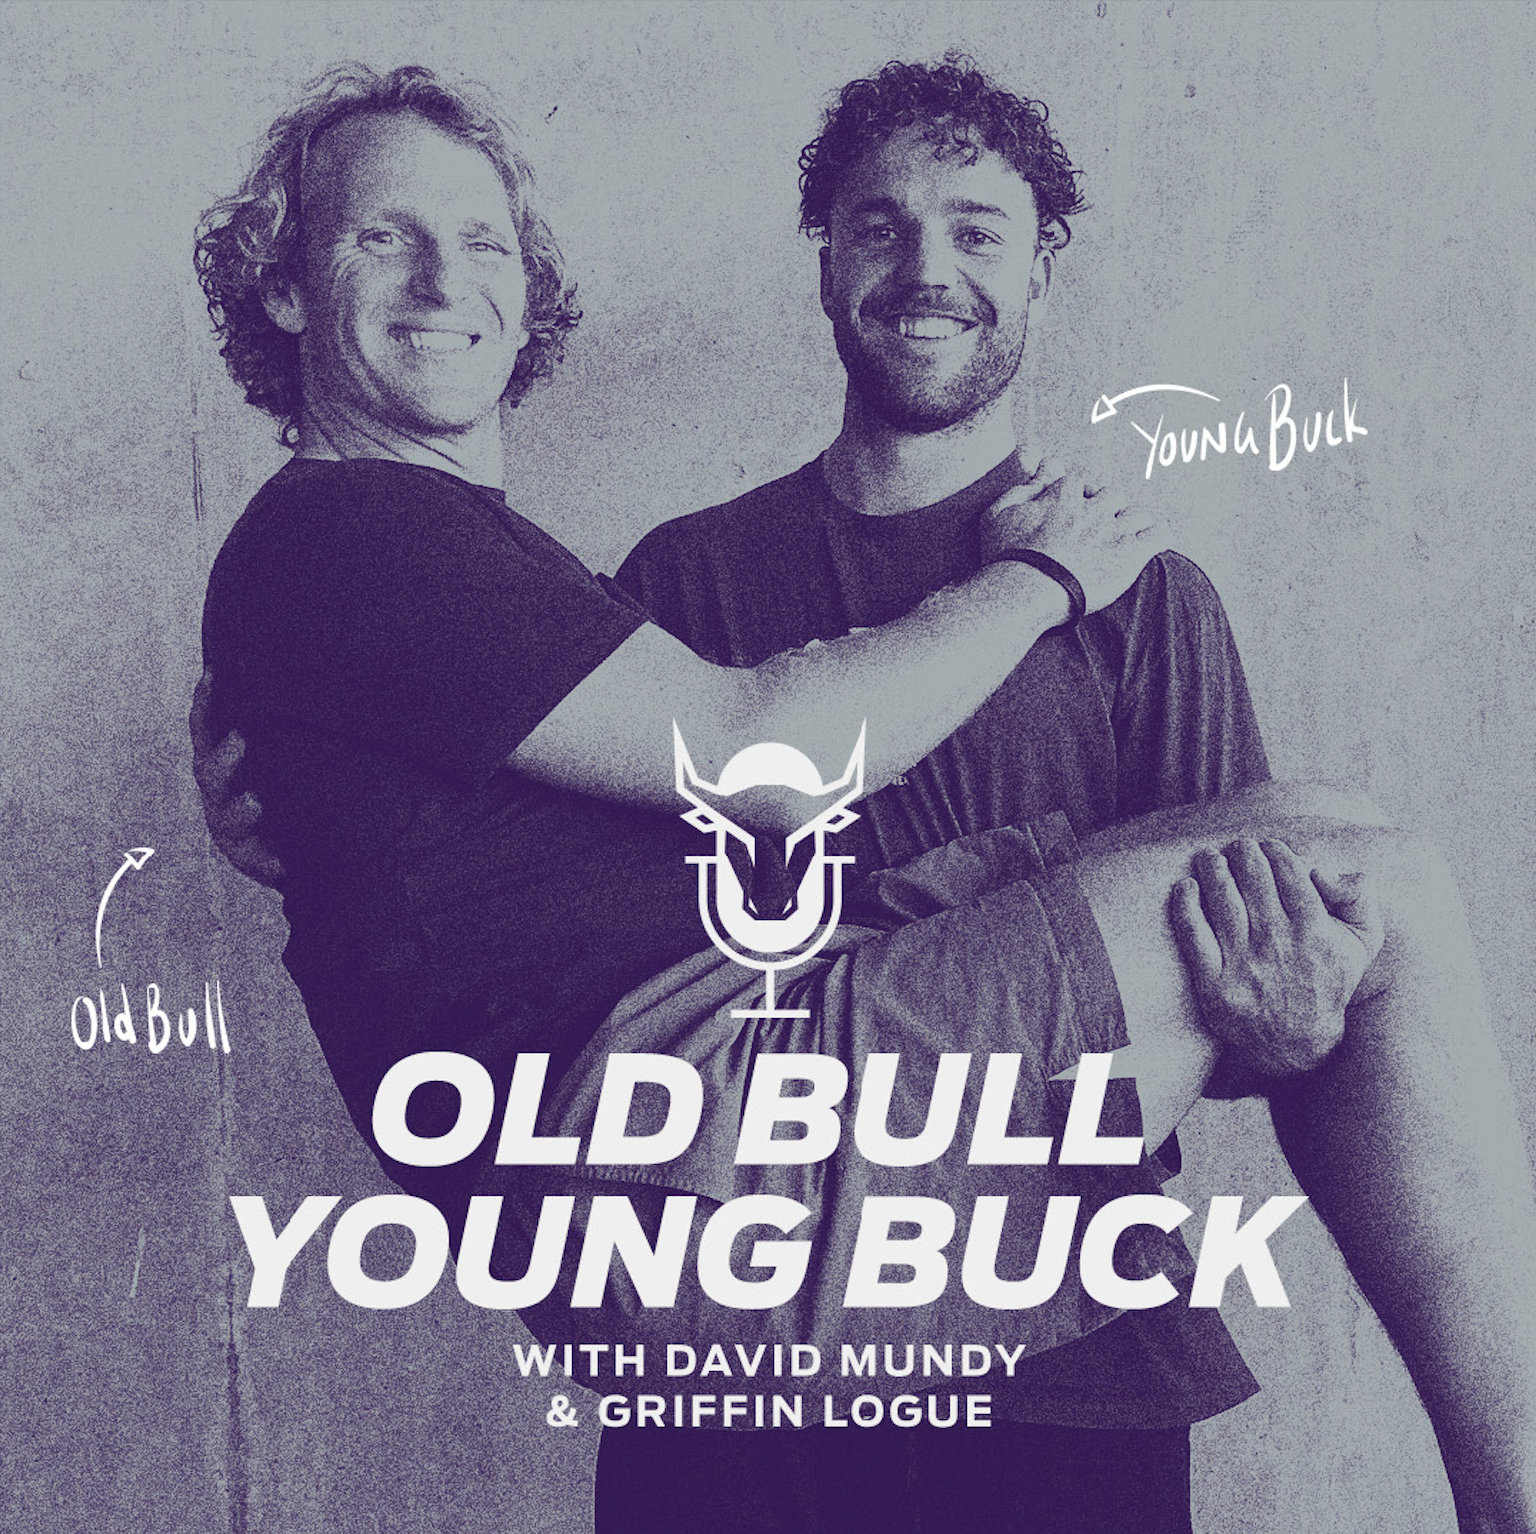 27. Old Bull, Young Buck CROSSOVER POD with Kickin' Back!